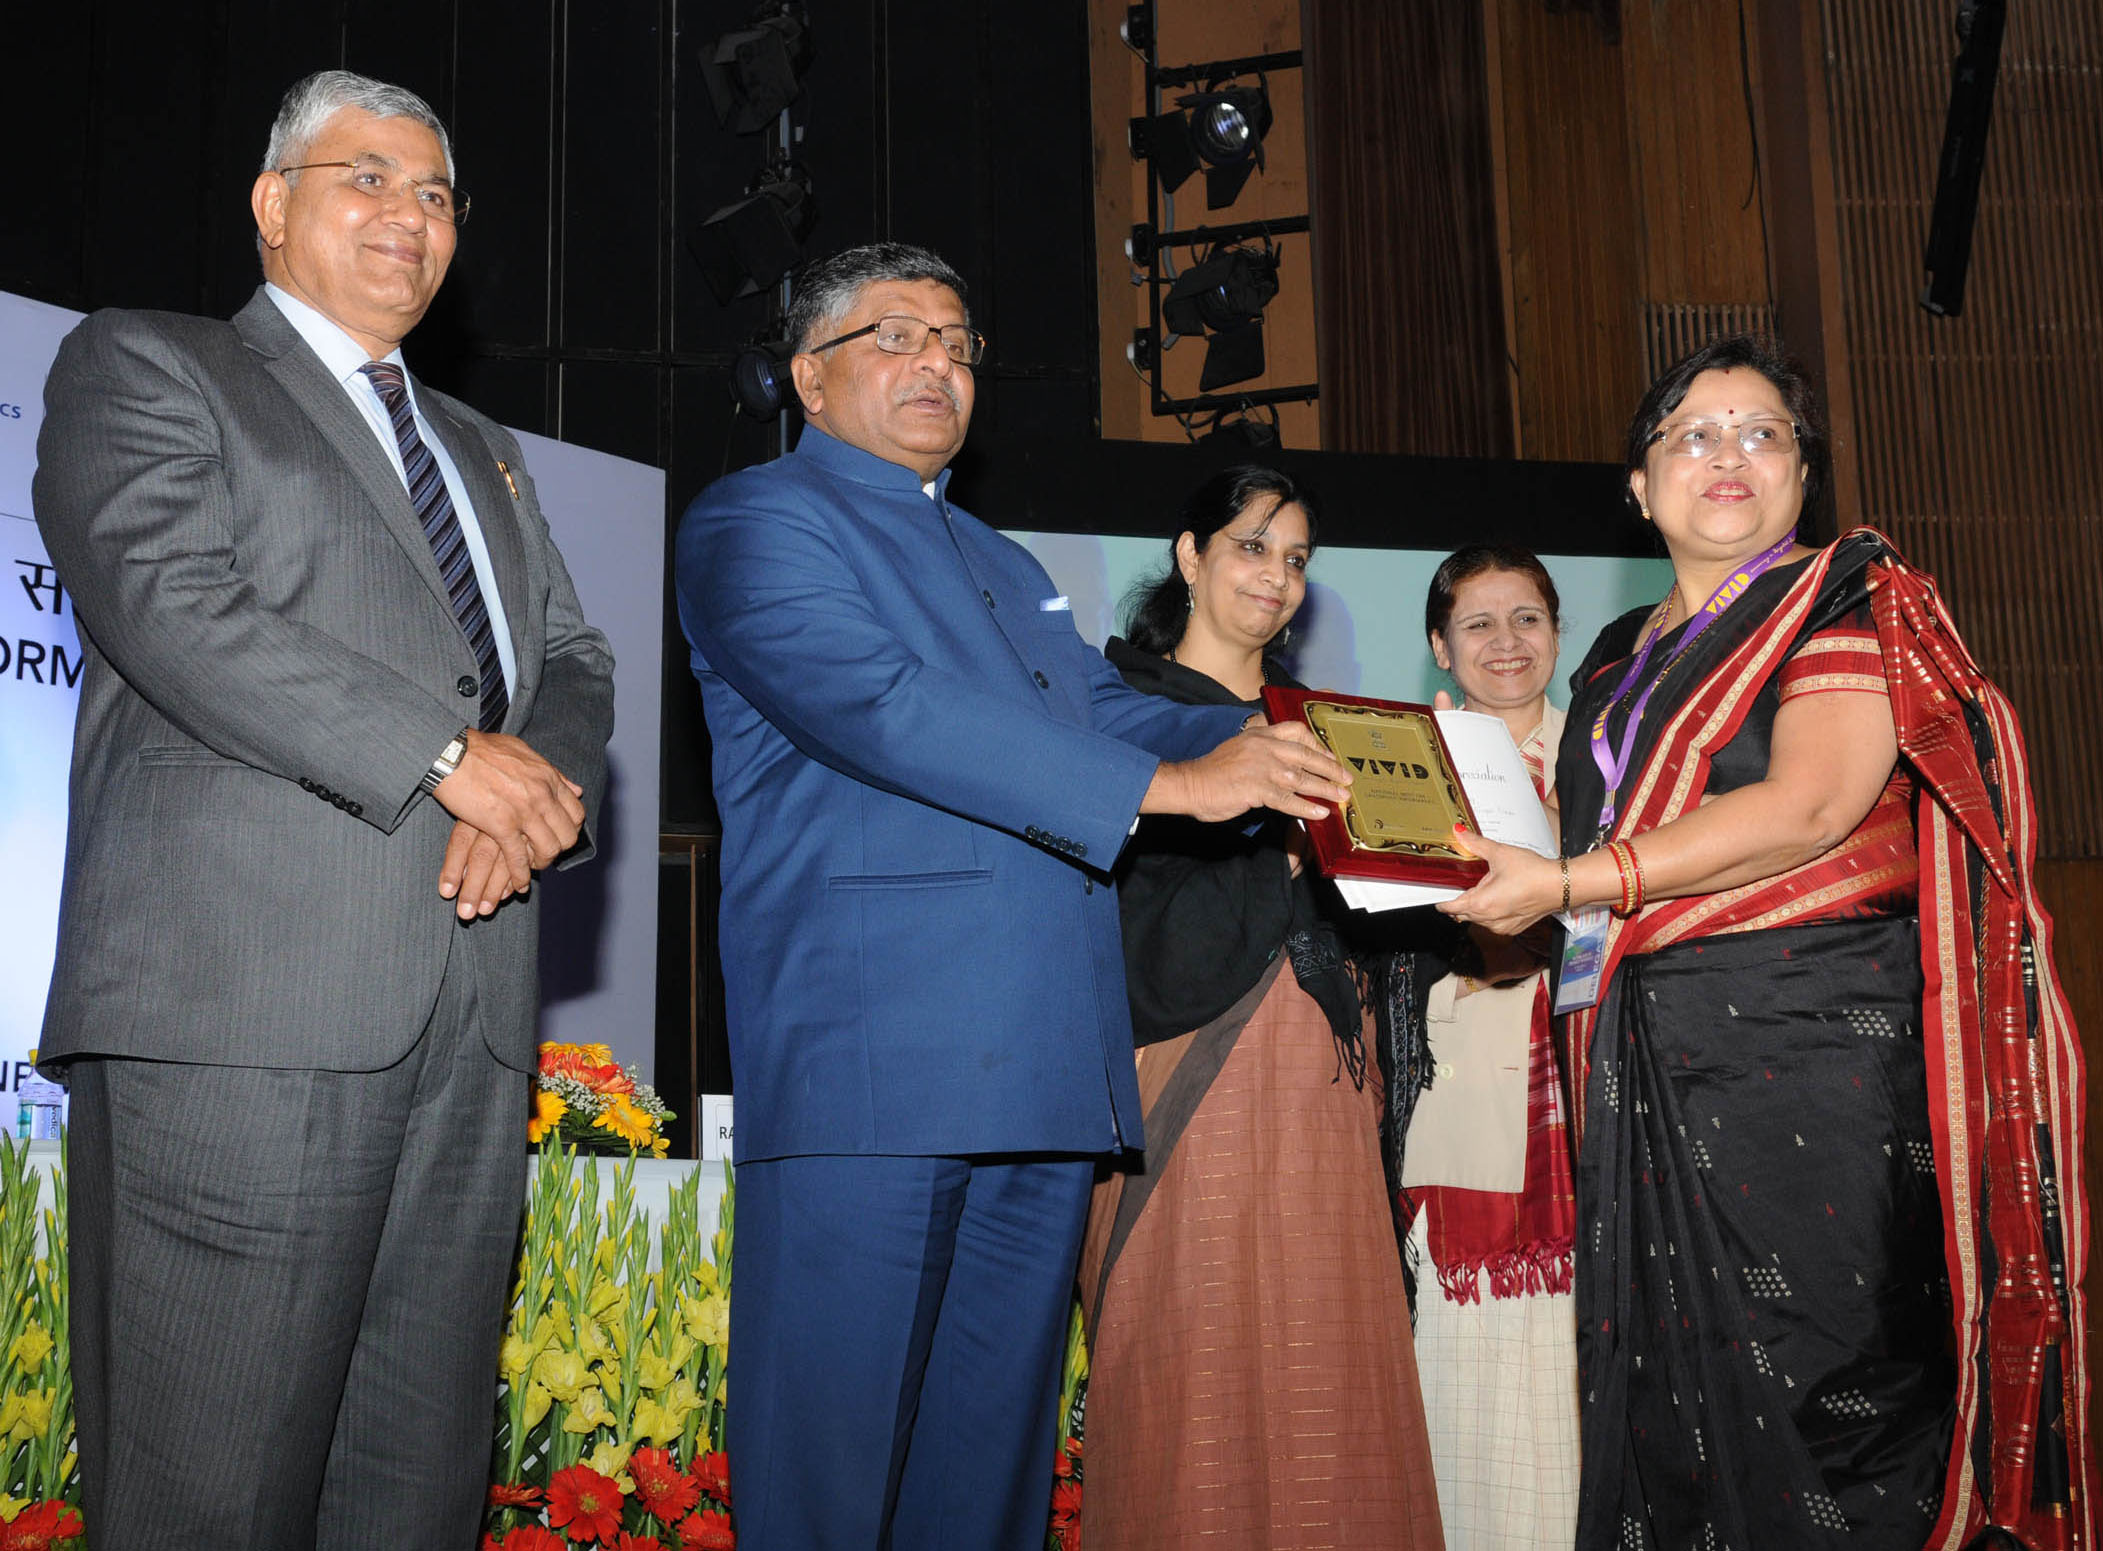 The Union Minister for Electronics & Information Technology and Law & Justice, Shri Ravi Shankar Prasad presented the appreciation certificates, at the inauguration of the National Meet on Grassroot Informatics - Weaving a Digital India, organised by the National Informatics Centre (NIC), in New Delhi on January 19, 2017. The Minister of State for Electronics & Information Technology and Law & Justice, Shri P.P. Chaudhary and the Secretary, Ministry of Electronics & Information Technology, Ms. Aruna Sundararajan are also seen.